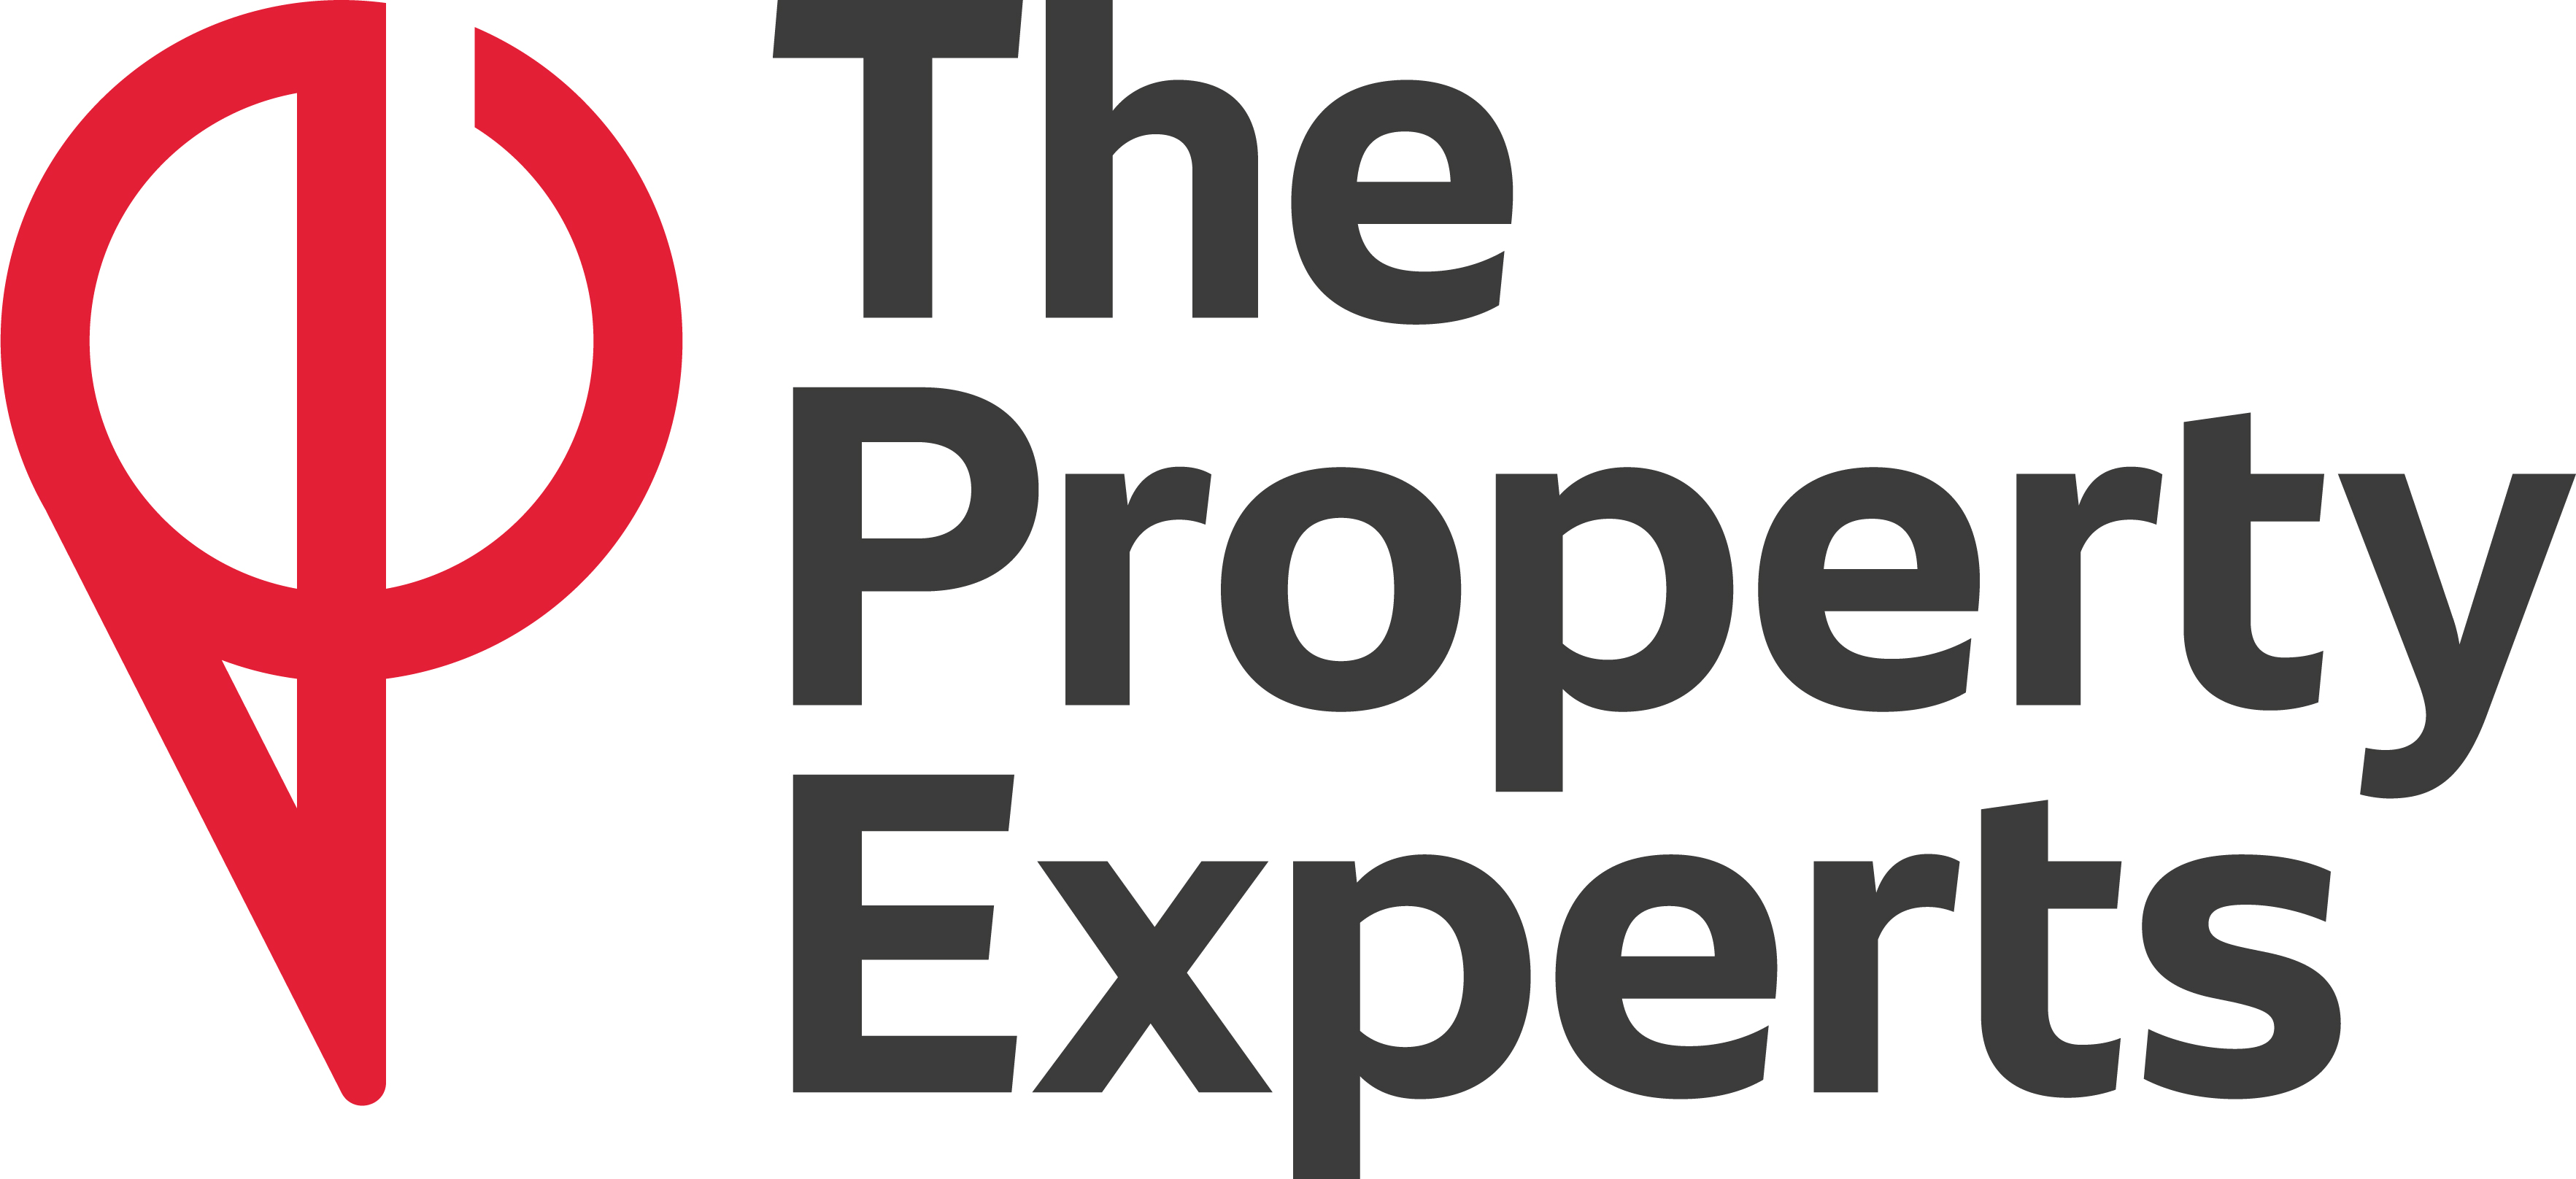 The Property Experts